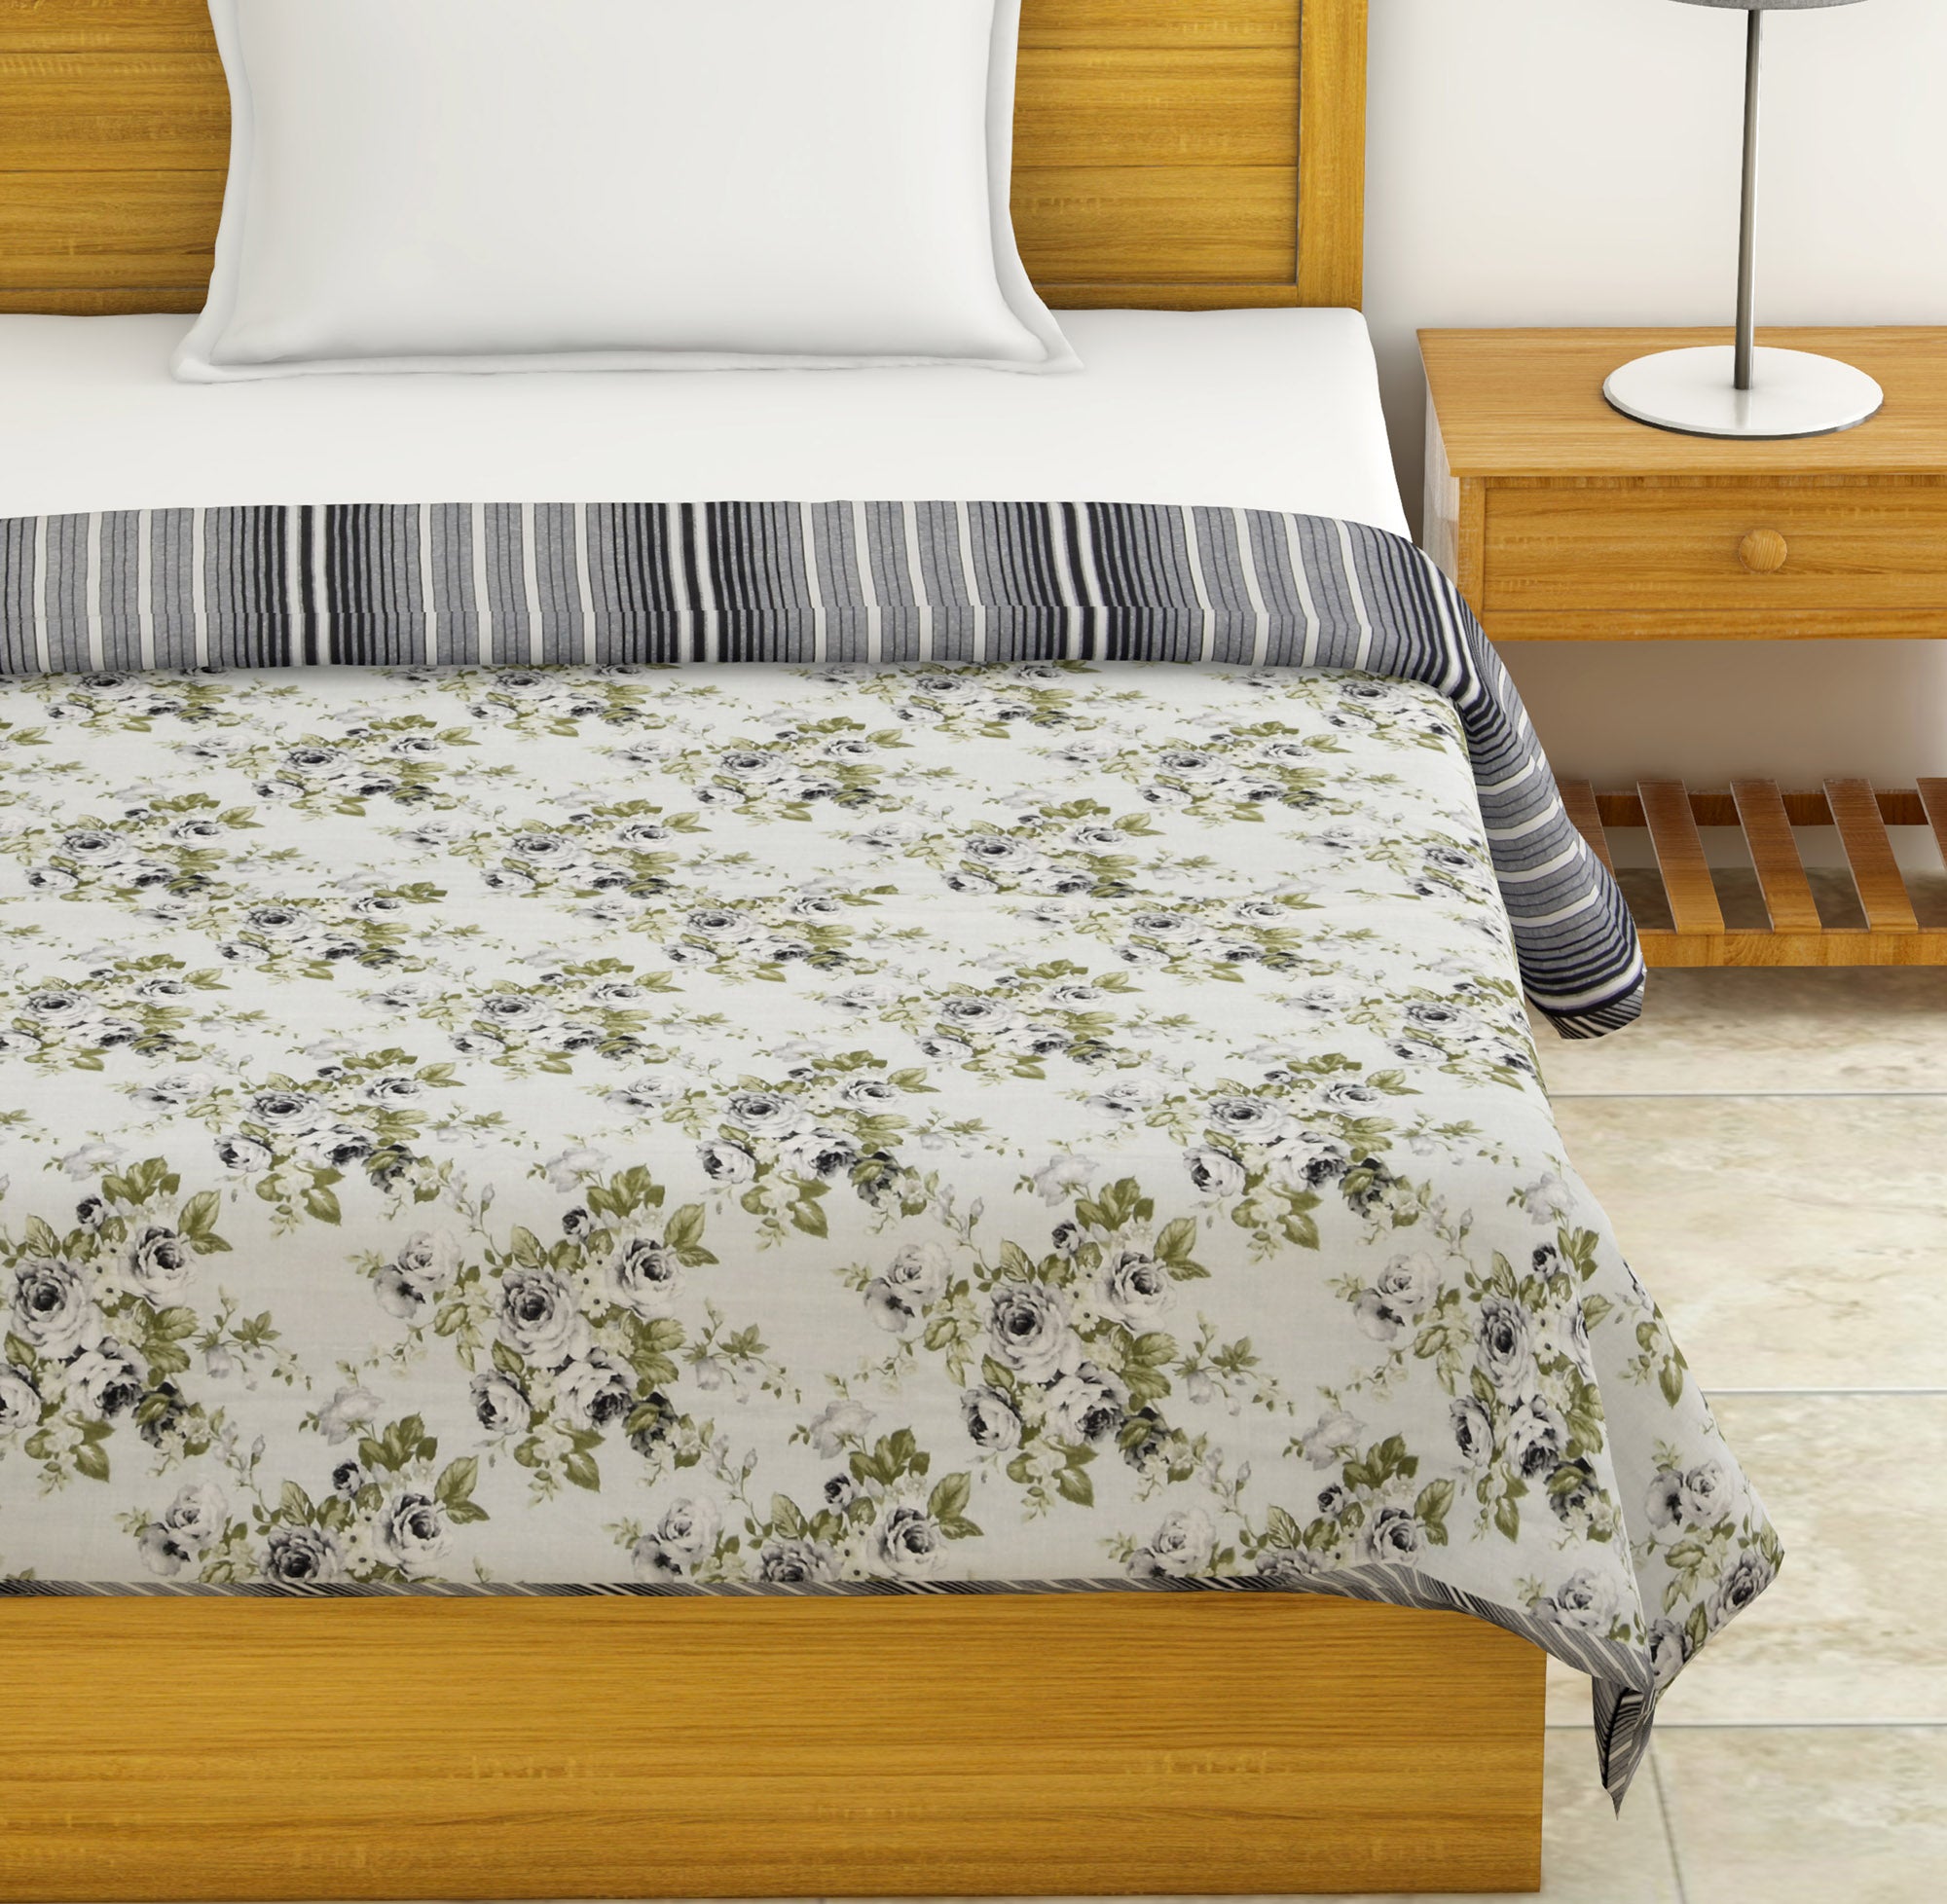 Dohar Cotton-Double Bed-Green Roses